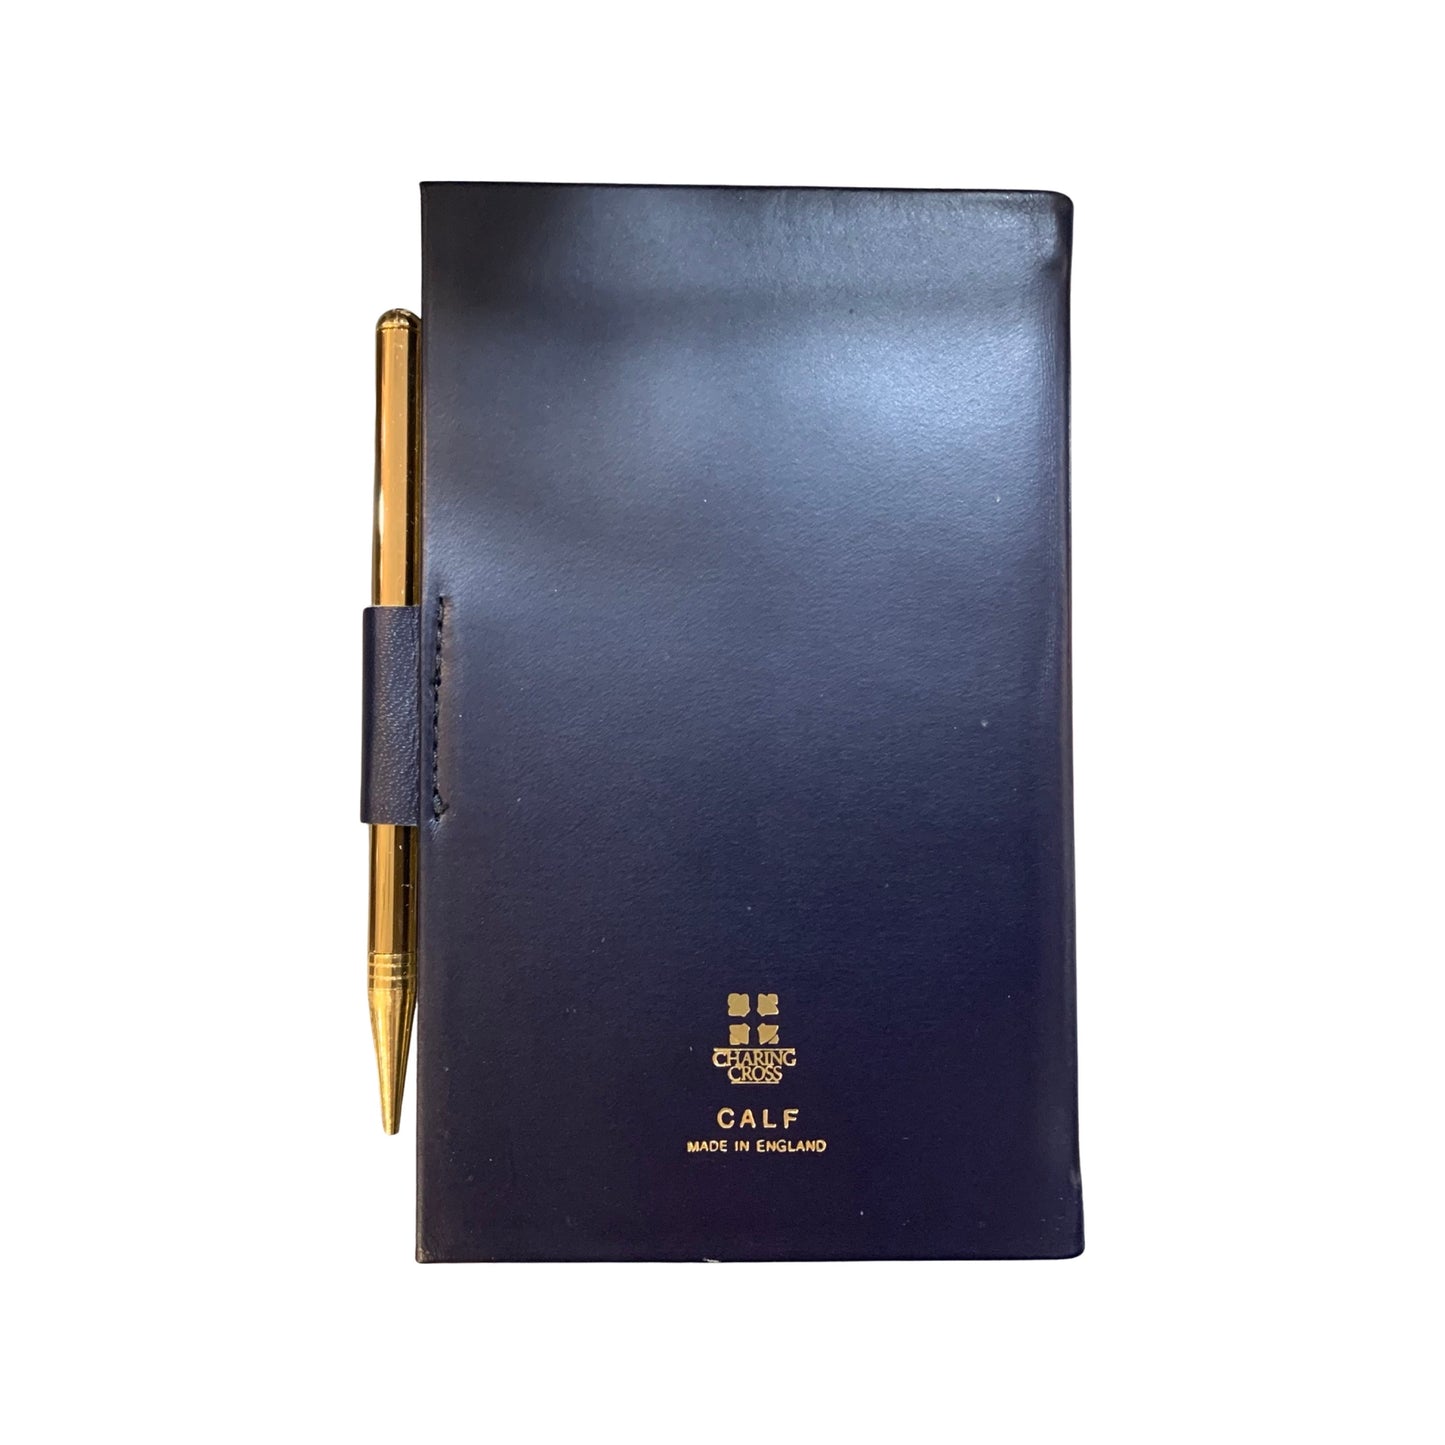 Address Book | Leather Pocket Passwords Book | 4 by 2.75 inches and 5 by 3 inches | Polished Calf | Charing Cross | A42CP